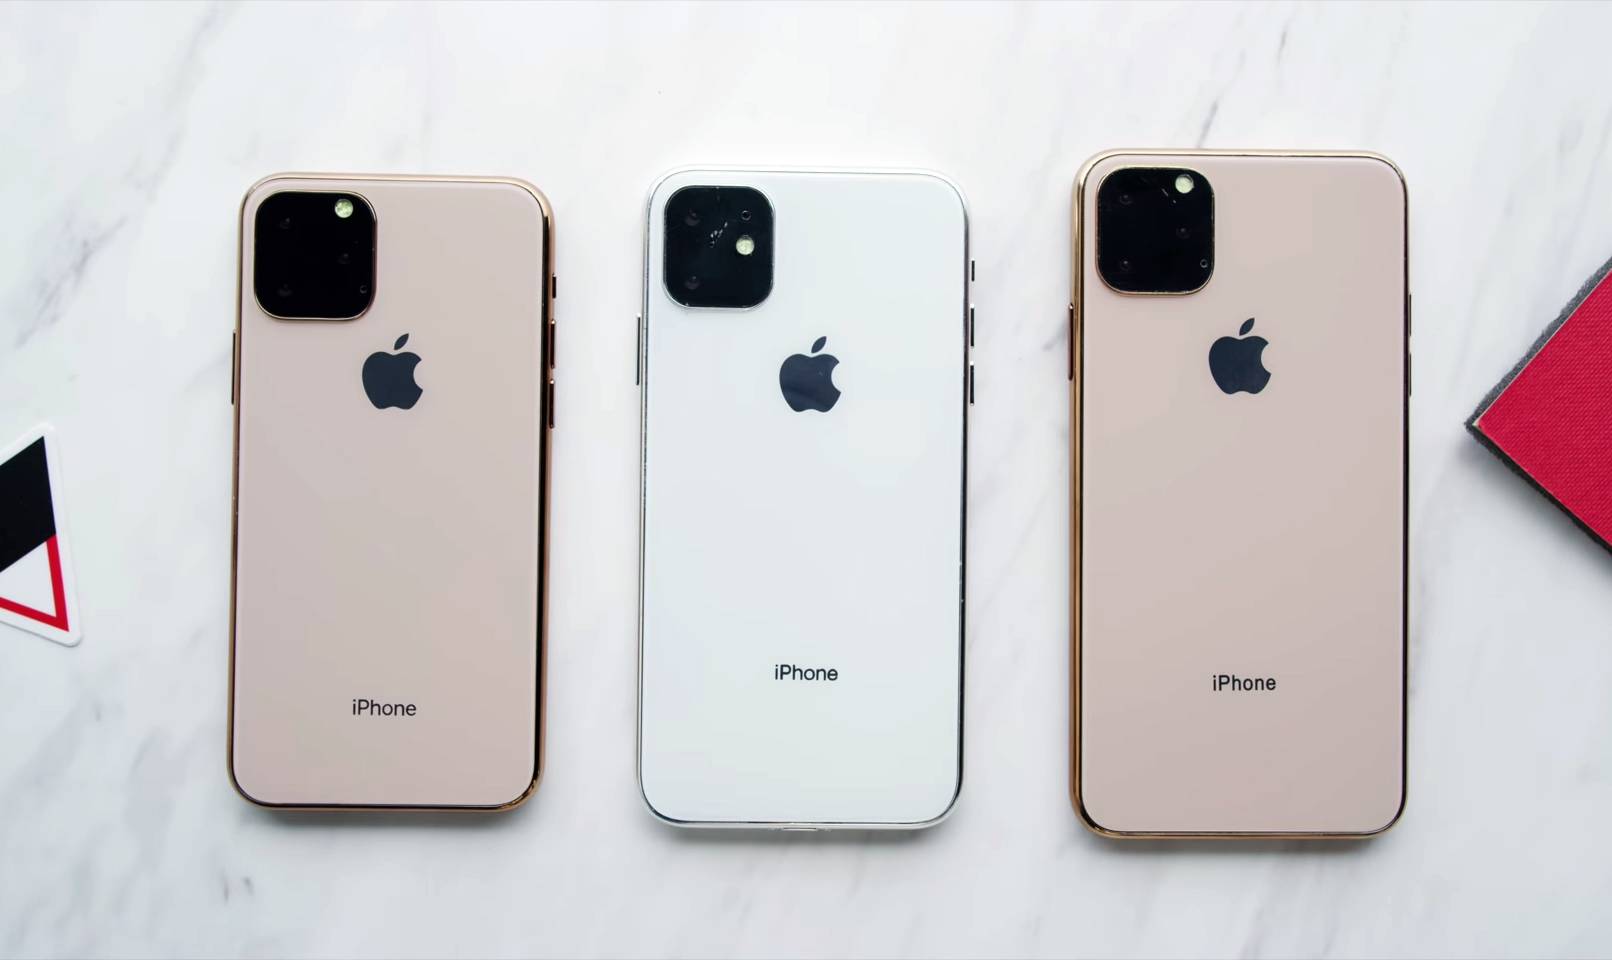 iPhone 11. LAUNCH OFFICIALLY announced by Apple, here is the DATE